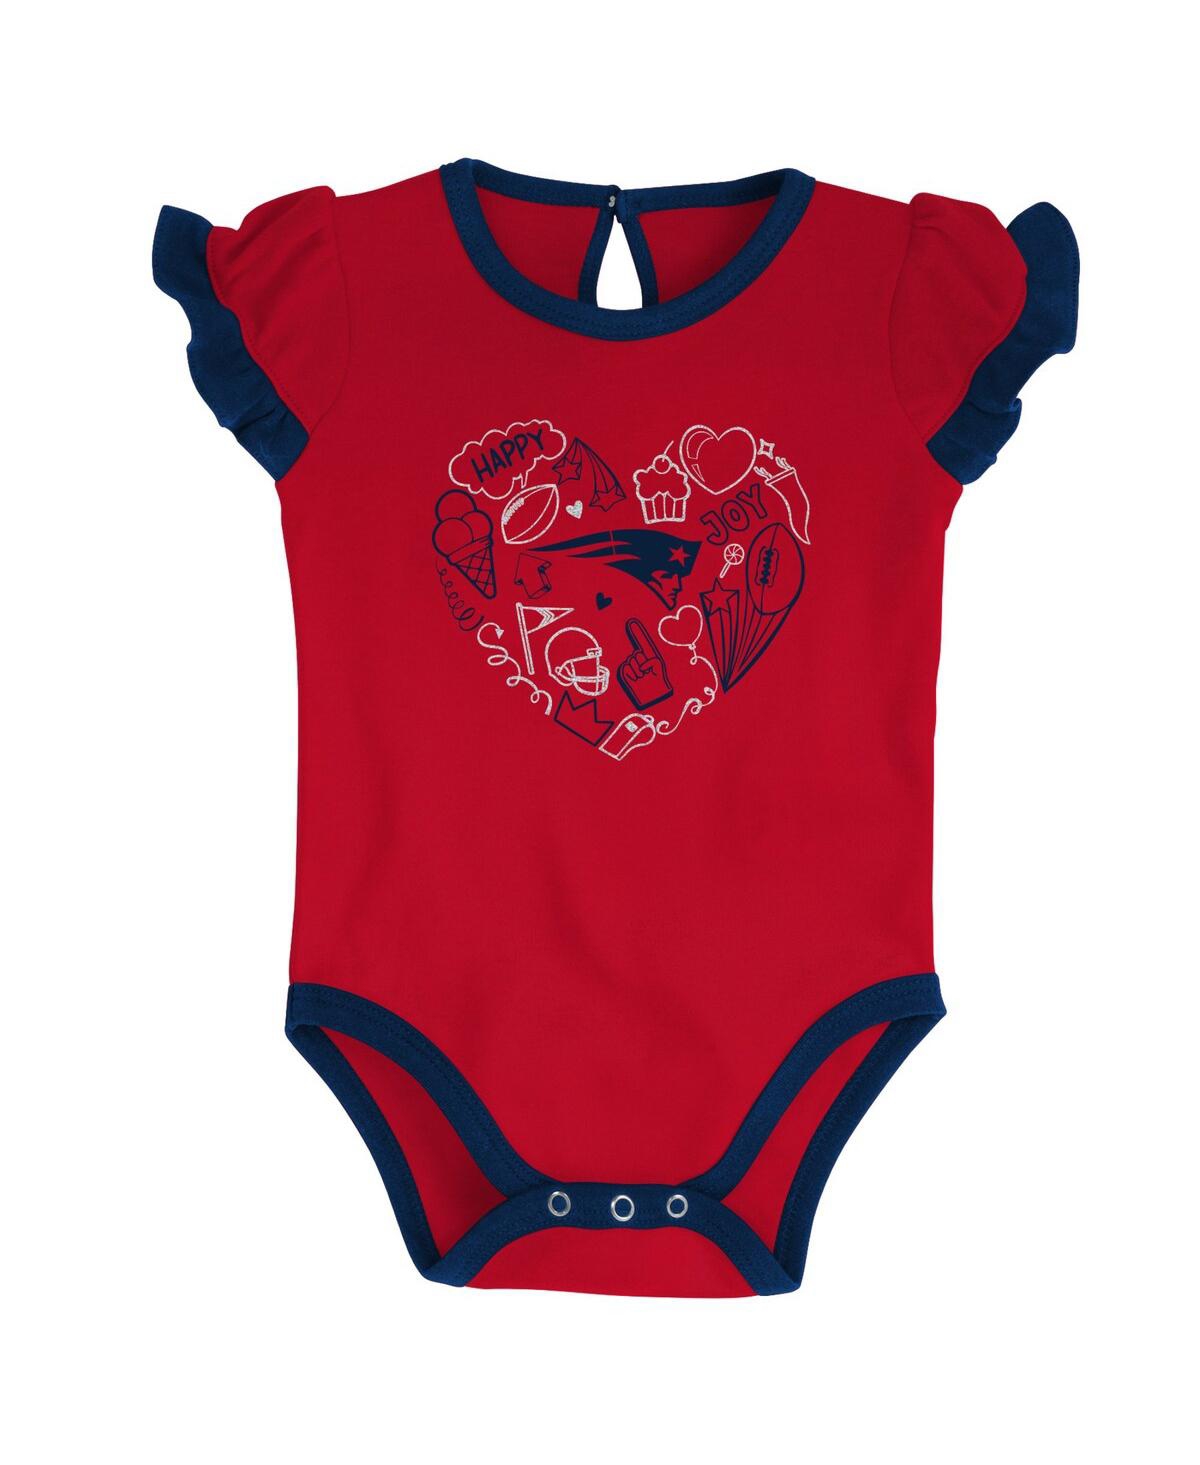 Shop Outerstuff Newborn And Infant Boys And Girls Navy, Red New England Patriots Too Much Love Two-piece Bodysuit Se In Navy,red